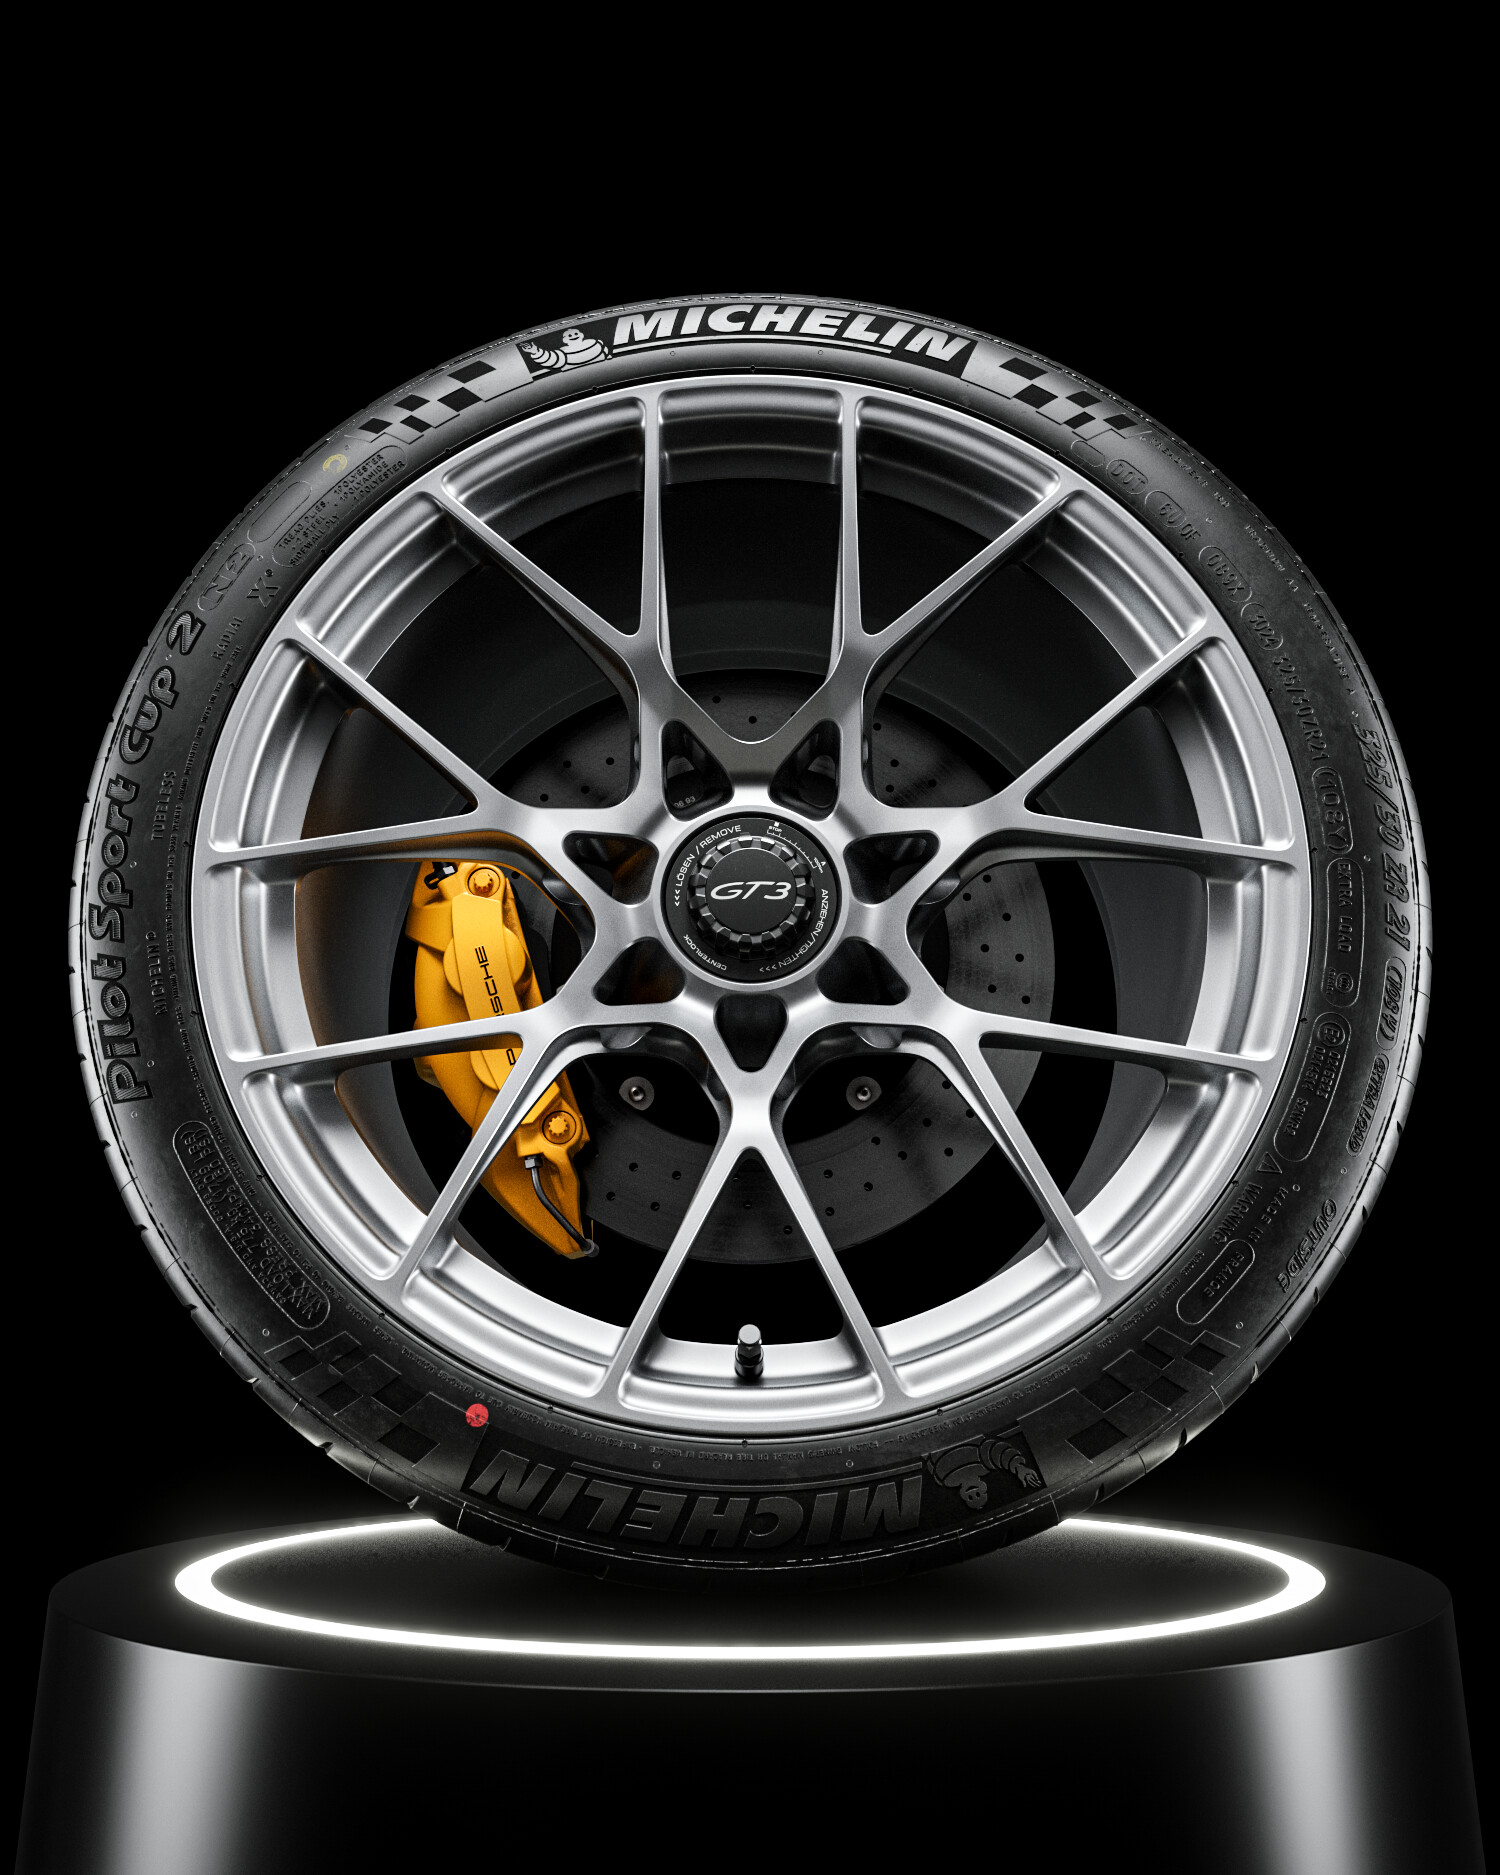 ArtStation - MICHELIN Pilot® Sport Cup 2 • R 325/30ZR21 (108Y) • 180/AA/A  (Real World Details) | Resources